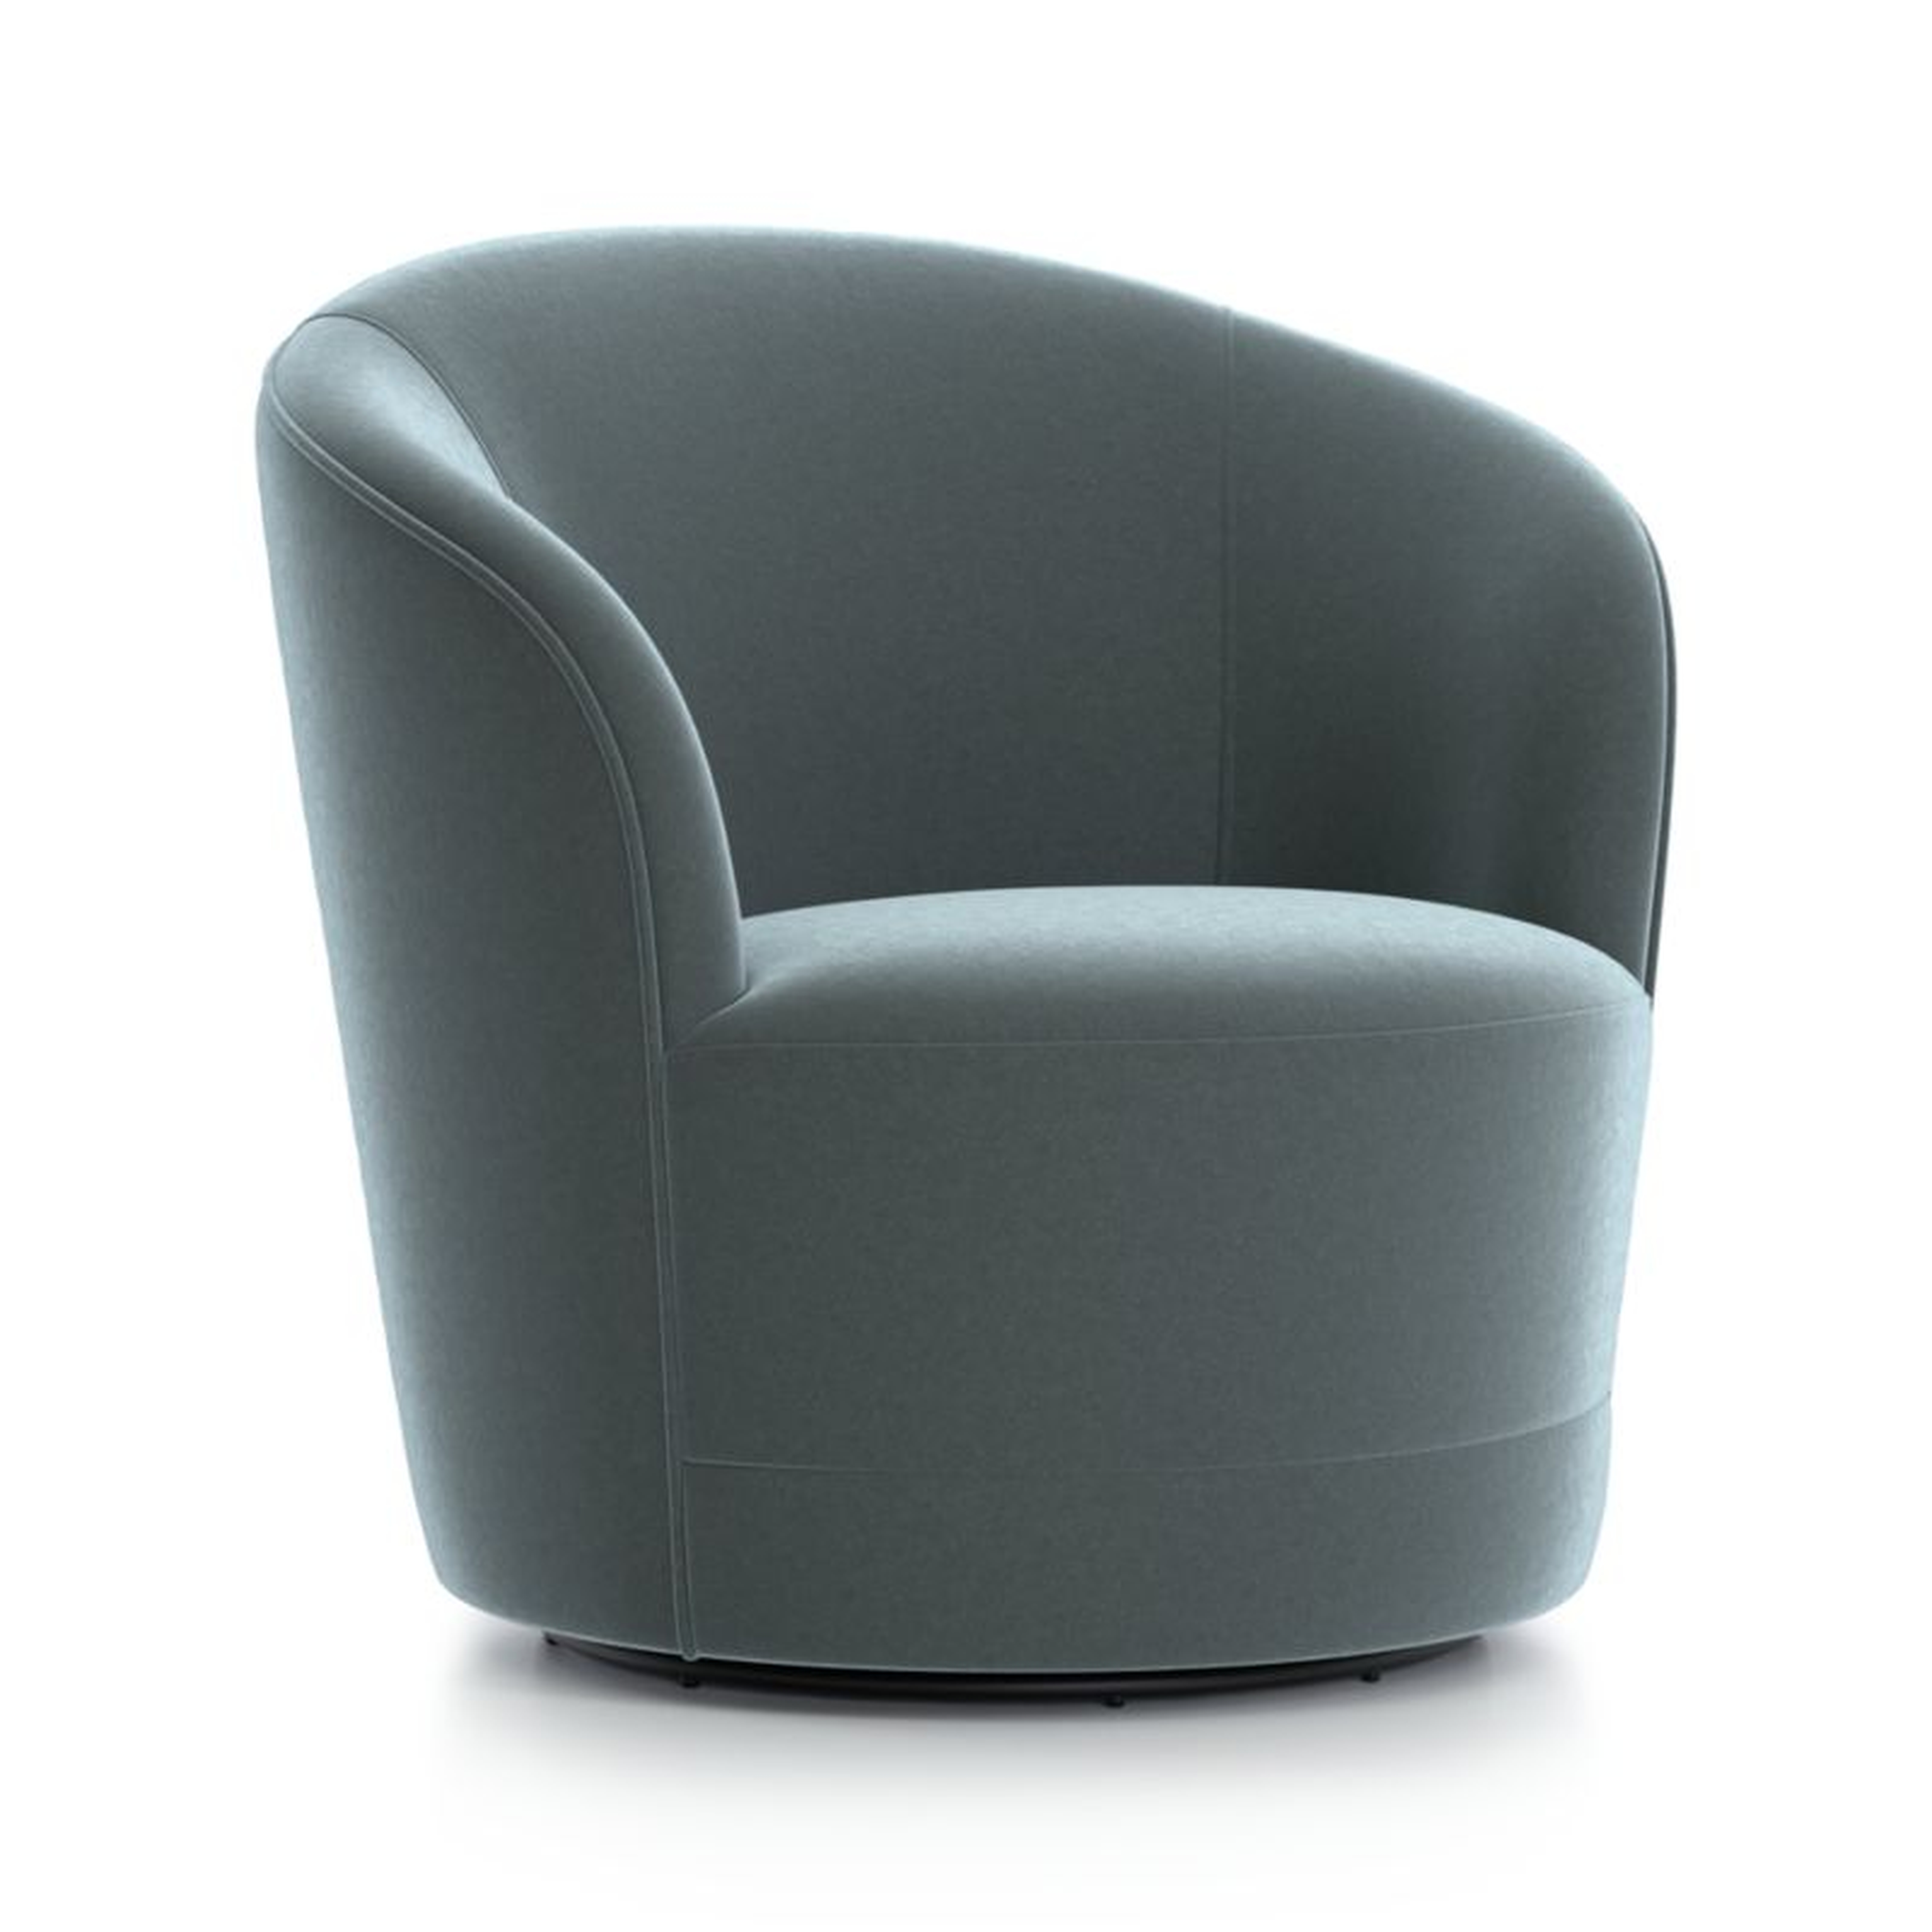 Infiniti Swivel Accent Chair - Crate and Barrel